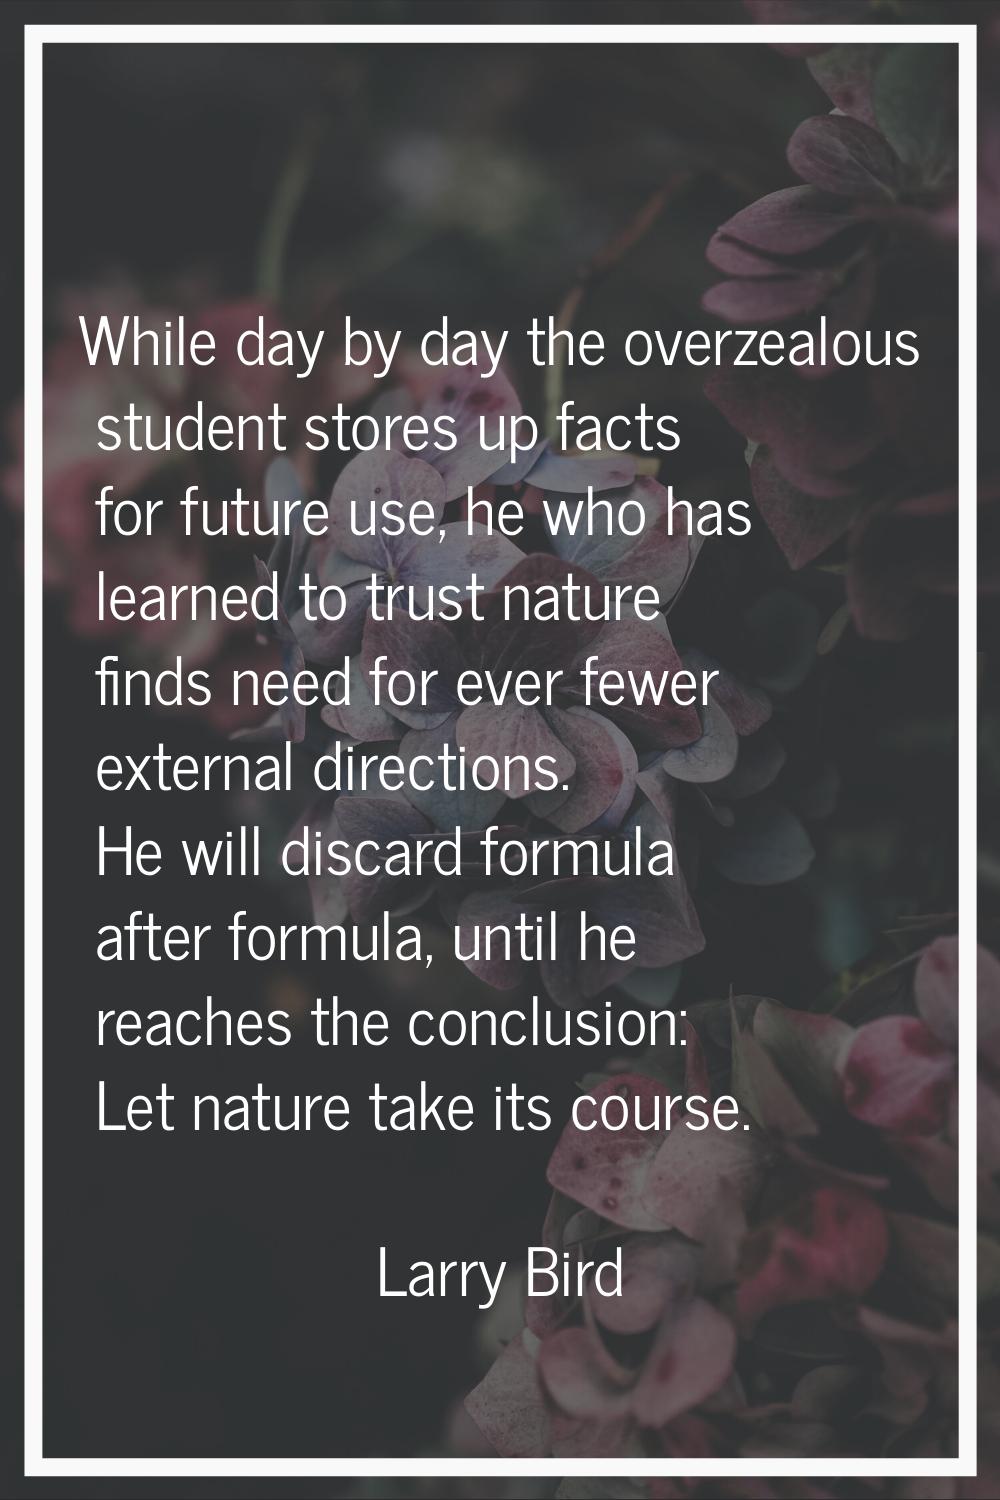 While day by day the overzealous student stores up facts for future use, he who has learned to trus